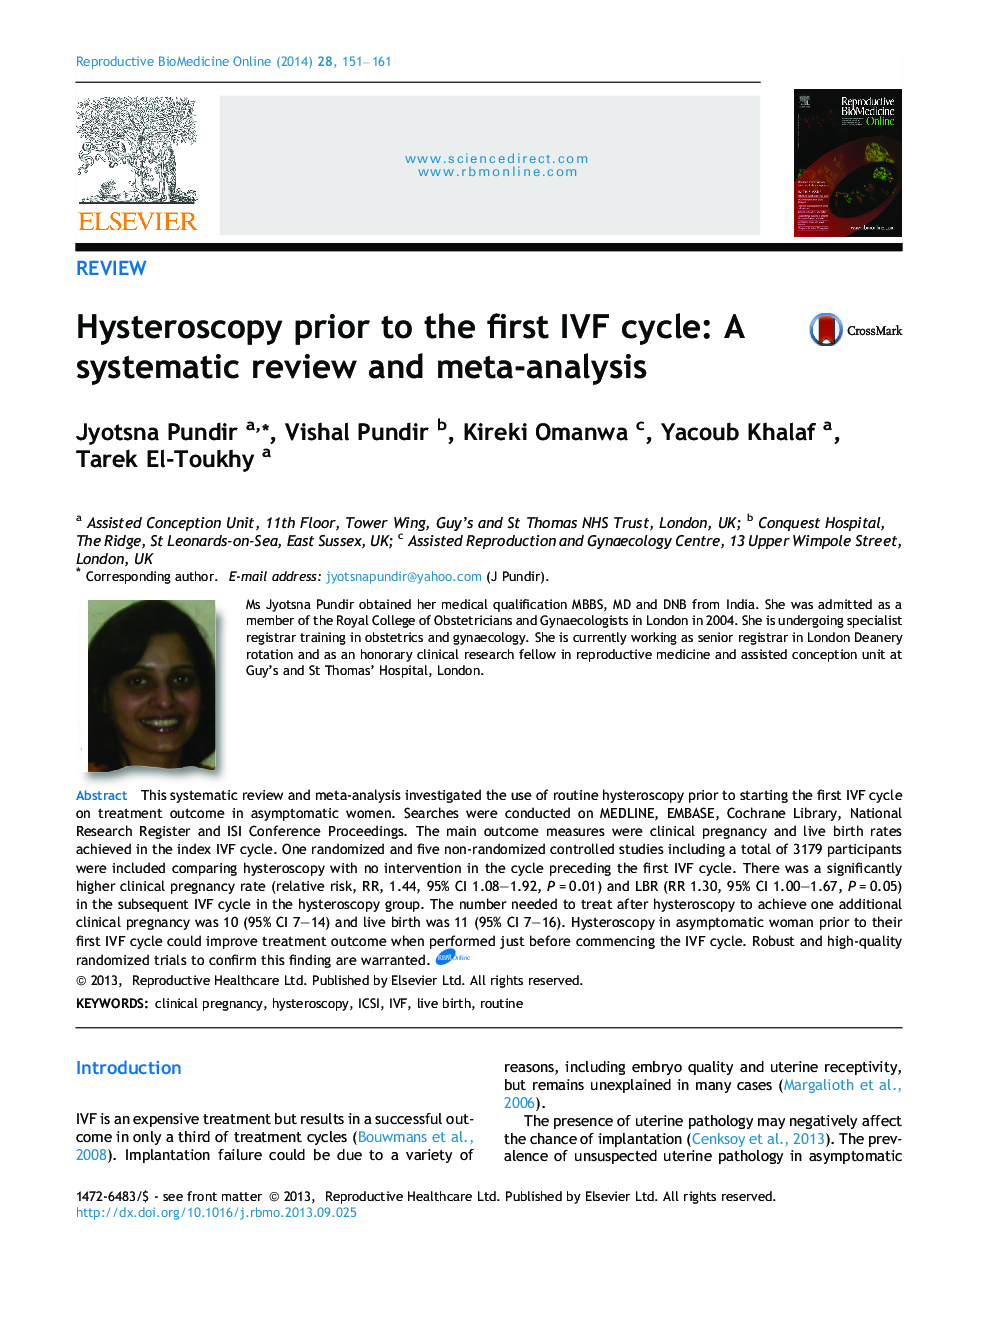 Hysteroscopy prior to the first IVF cycle: A systematic review and meta-analysis 